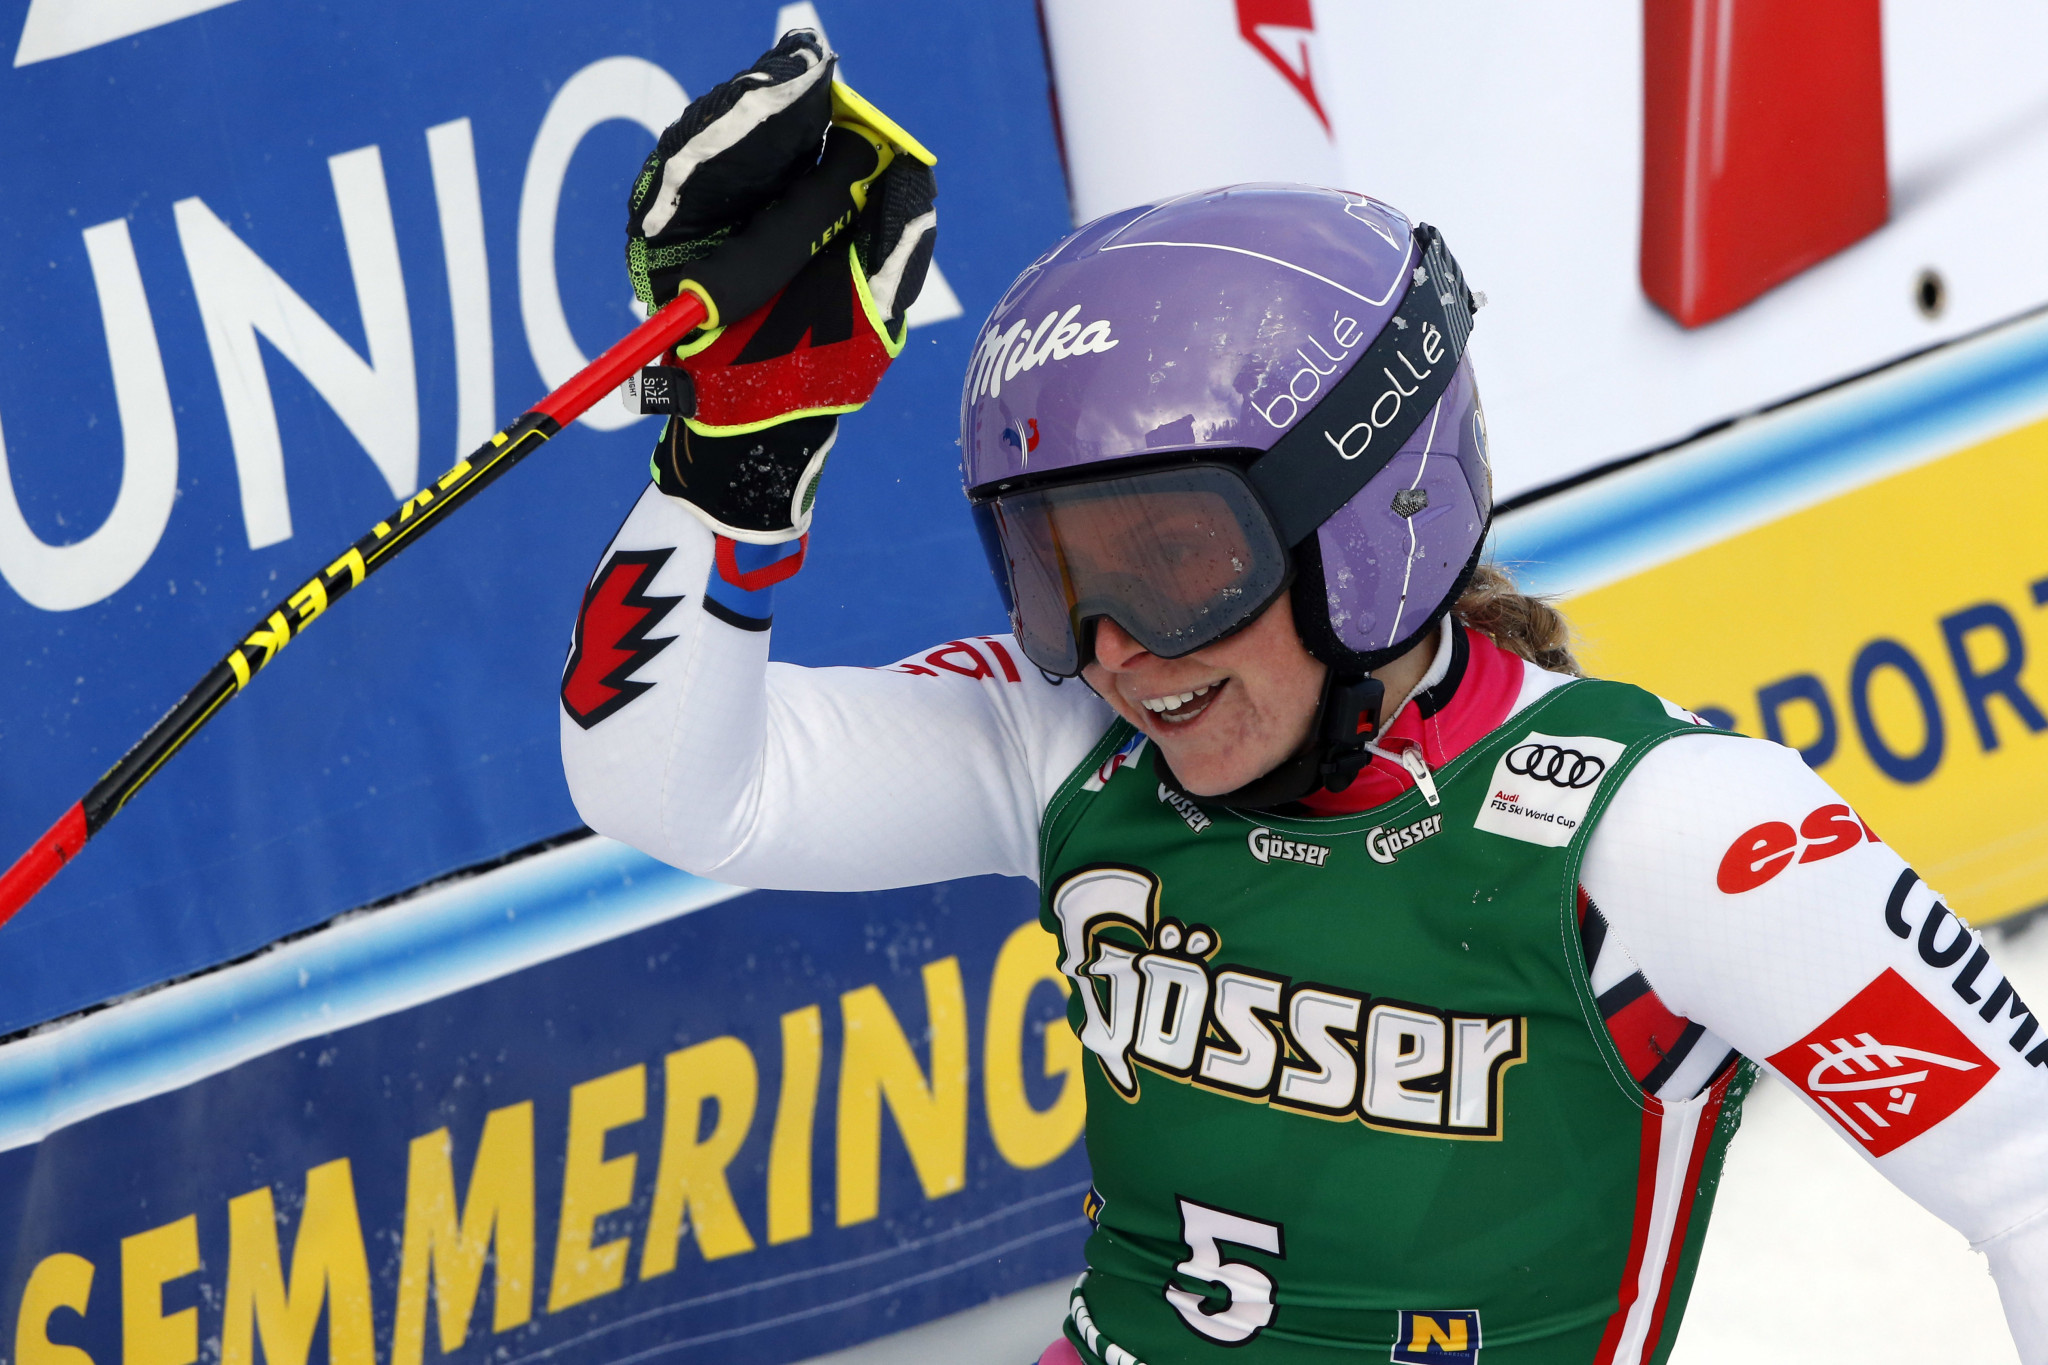 Tessa Worley will aim for a second giant slalom victory of the season ©Getty Images